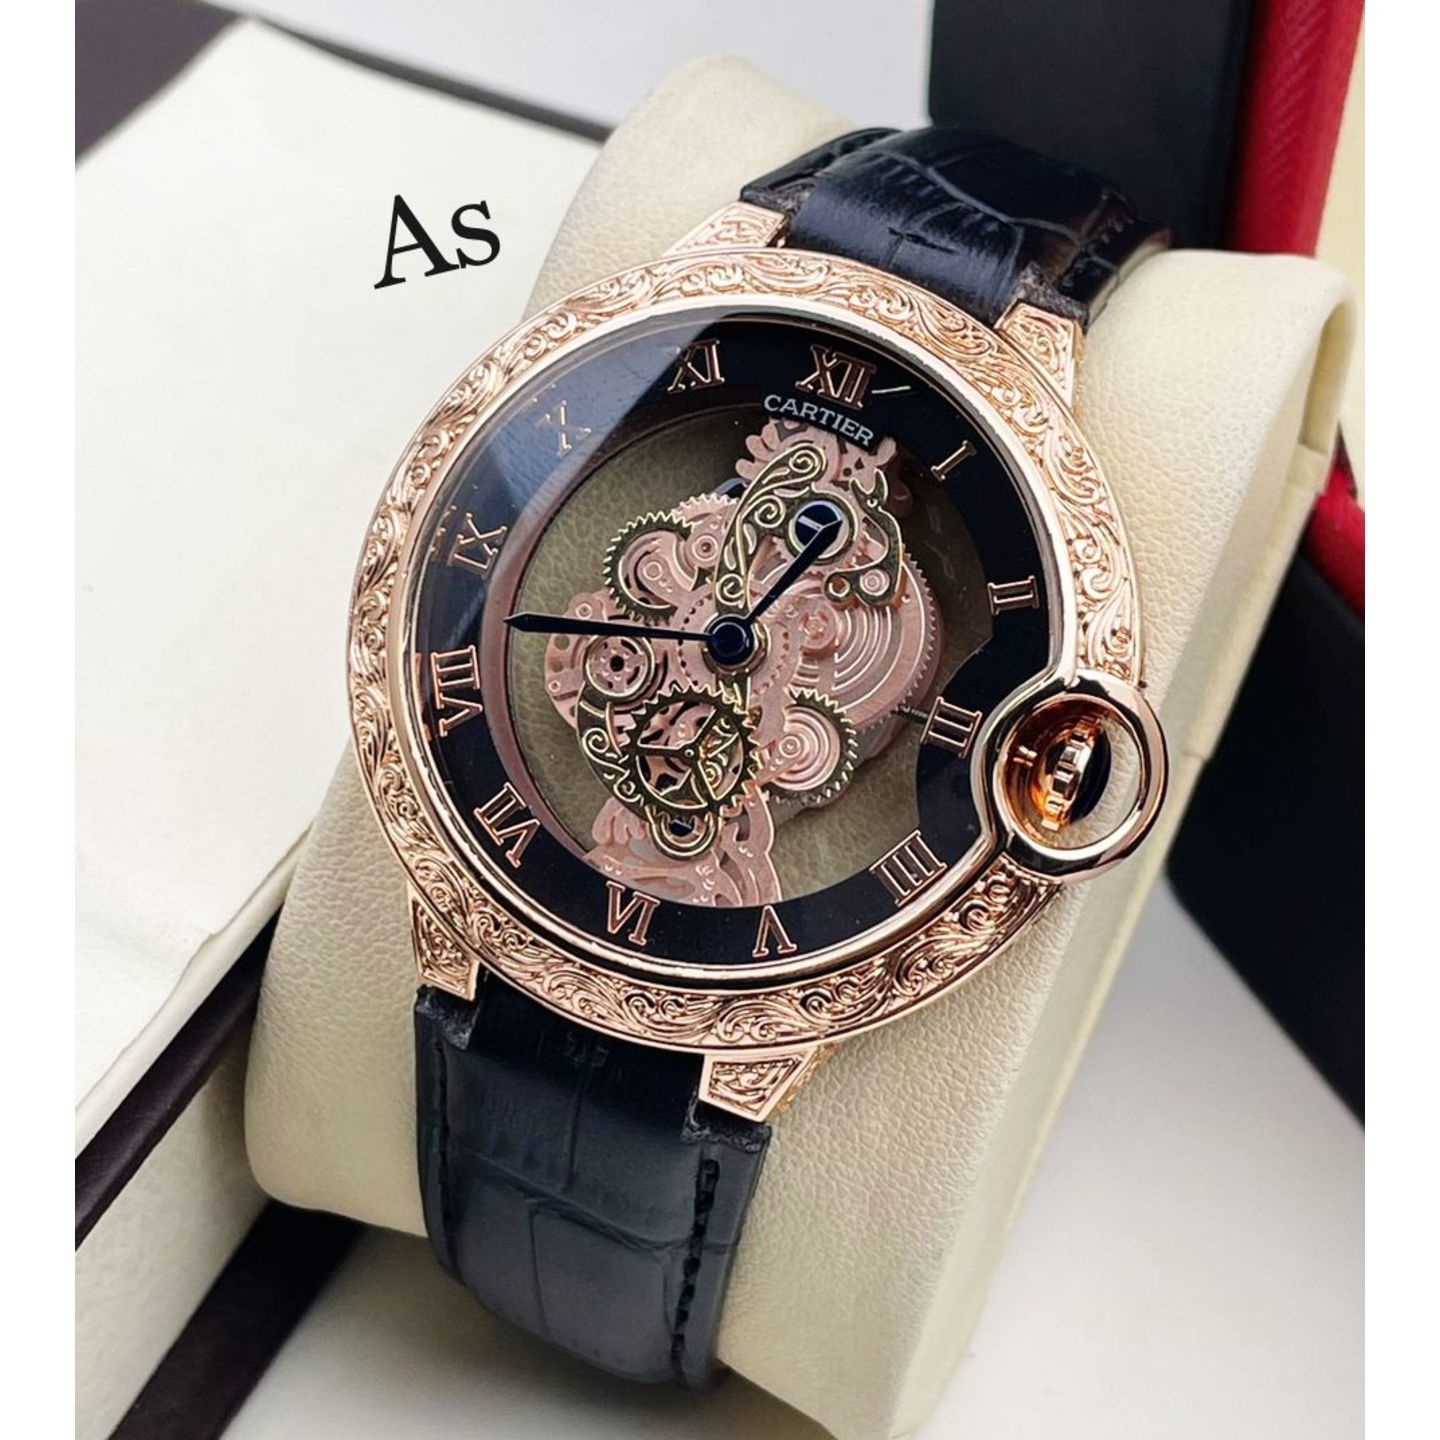 Rose Gold Cartiers Mens Watch with Black Belt